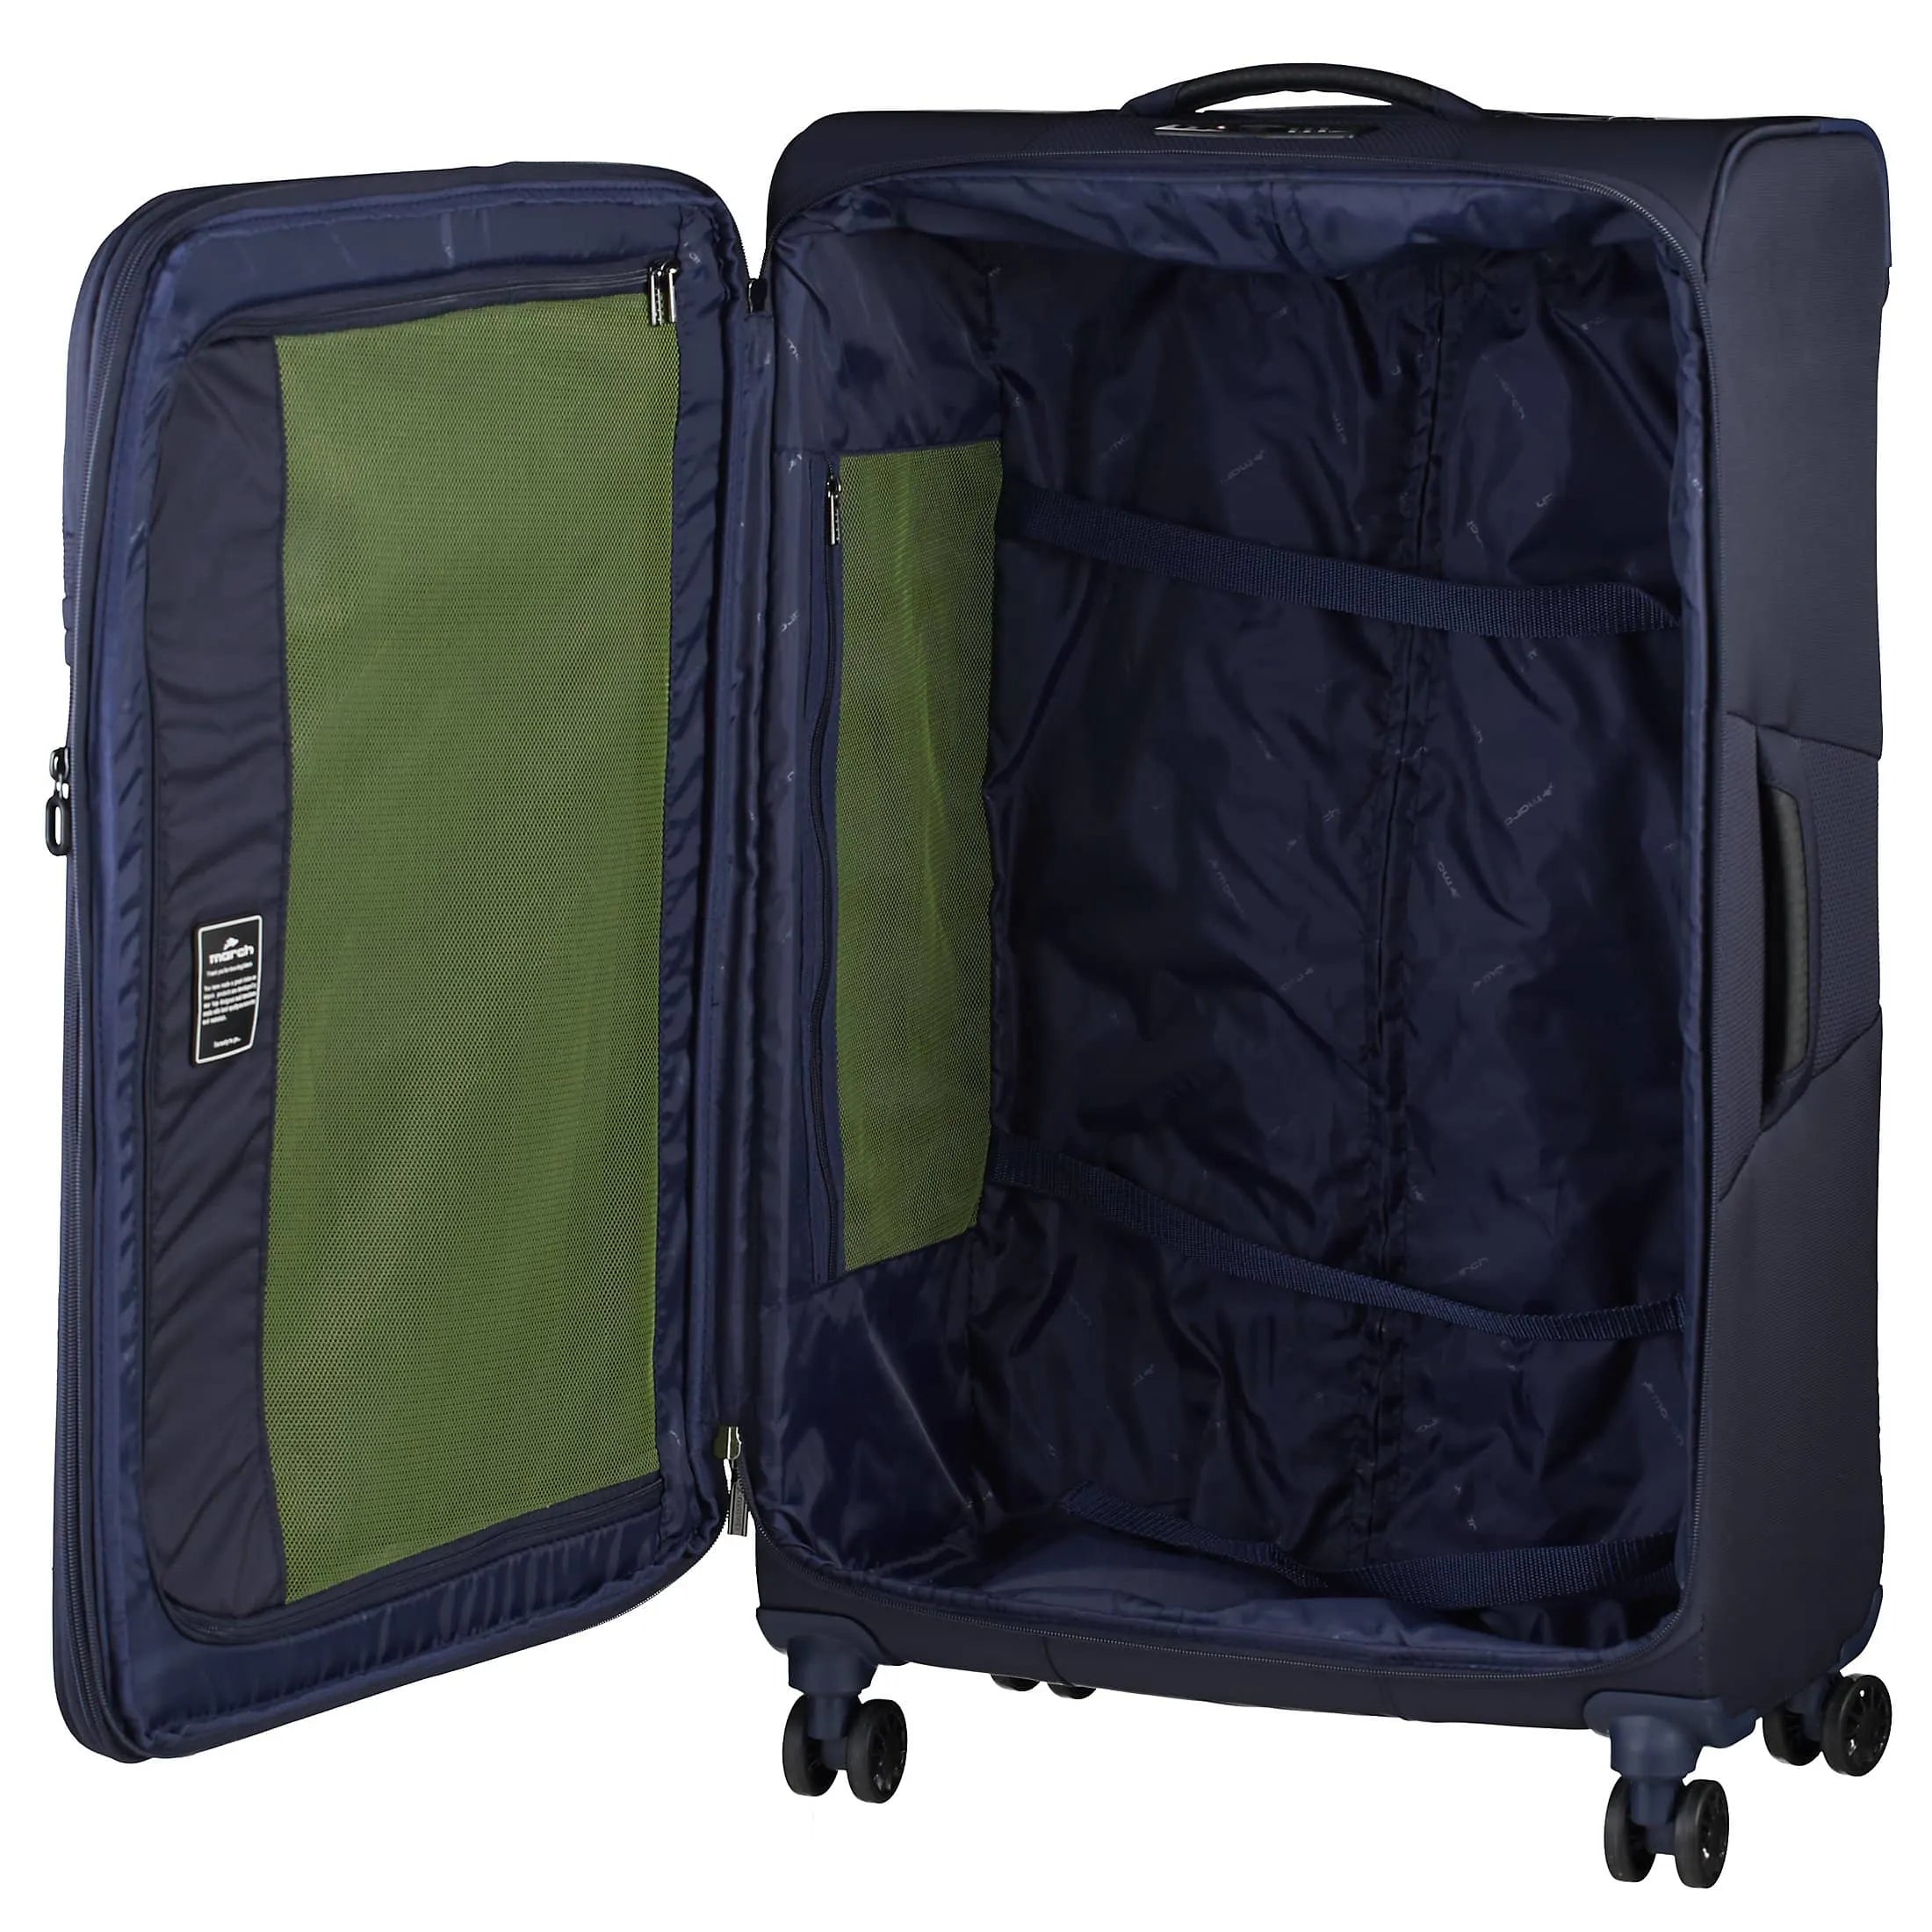 March 15 Trading Imperial 4-wheel trolley 78 cm - navy